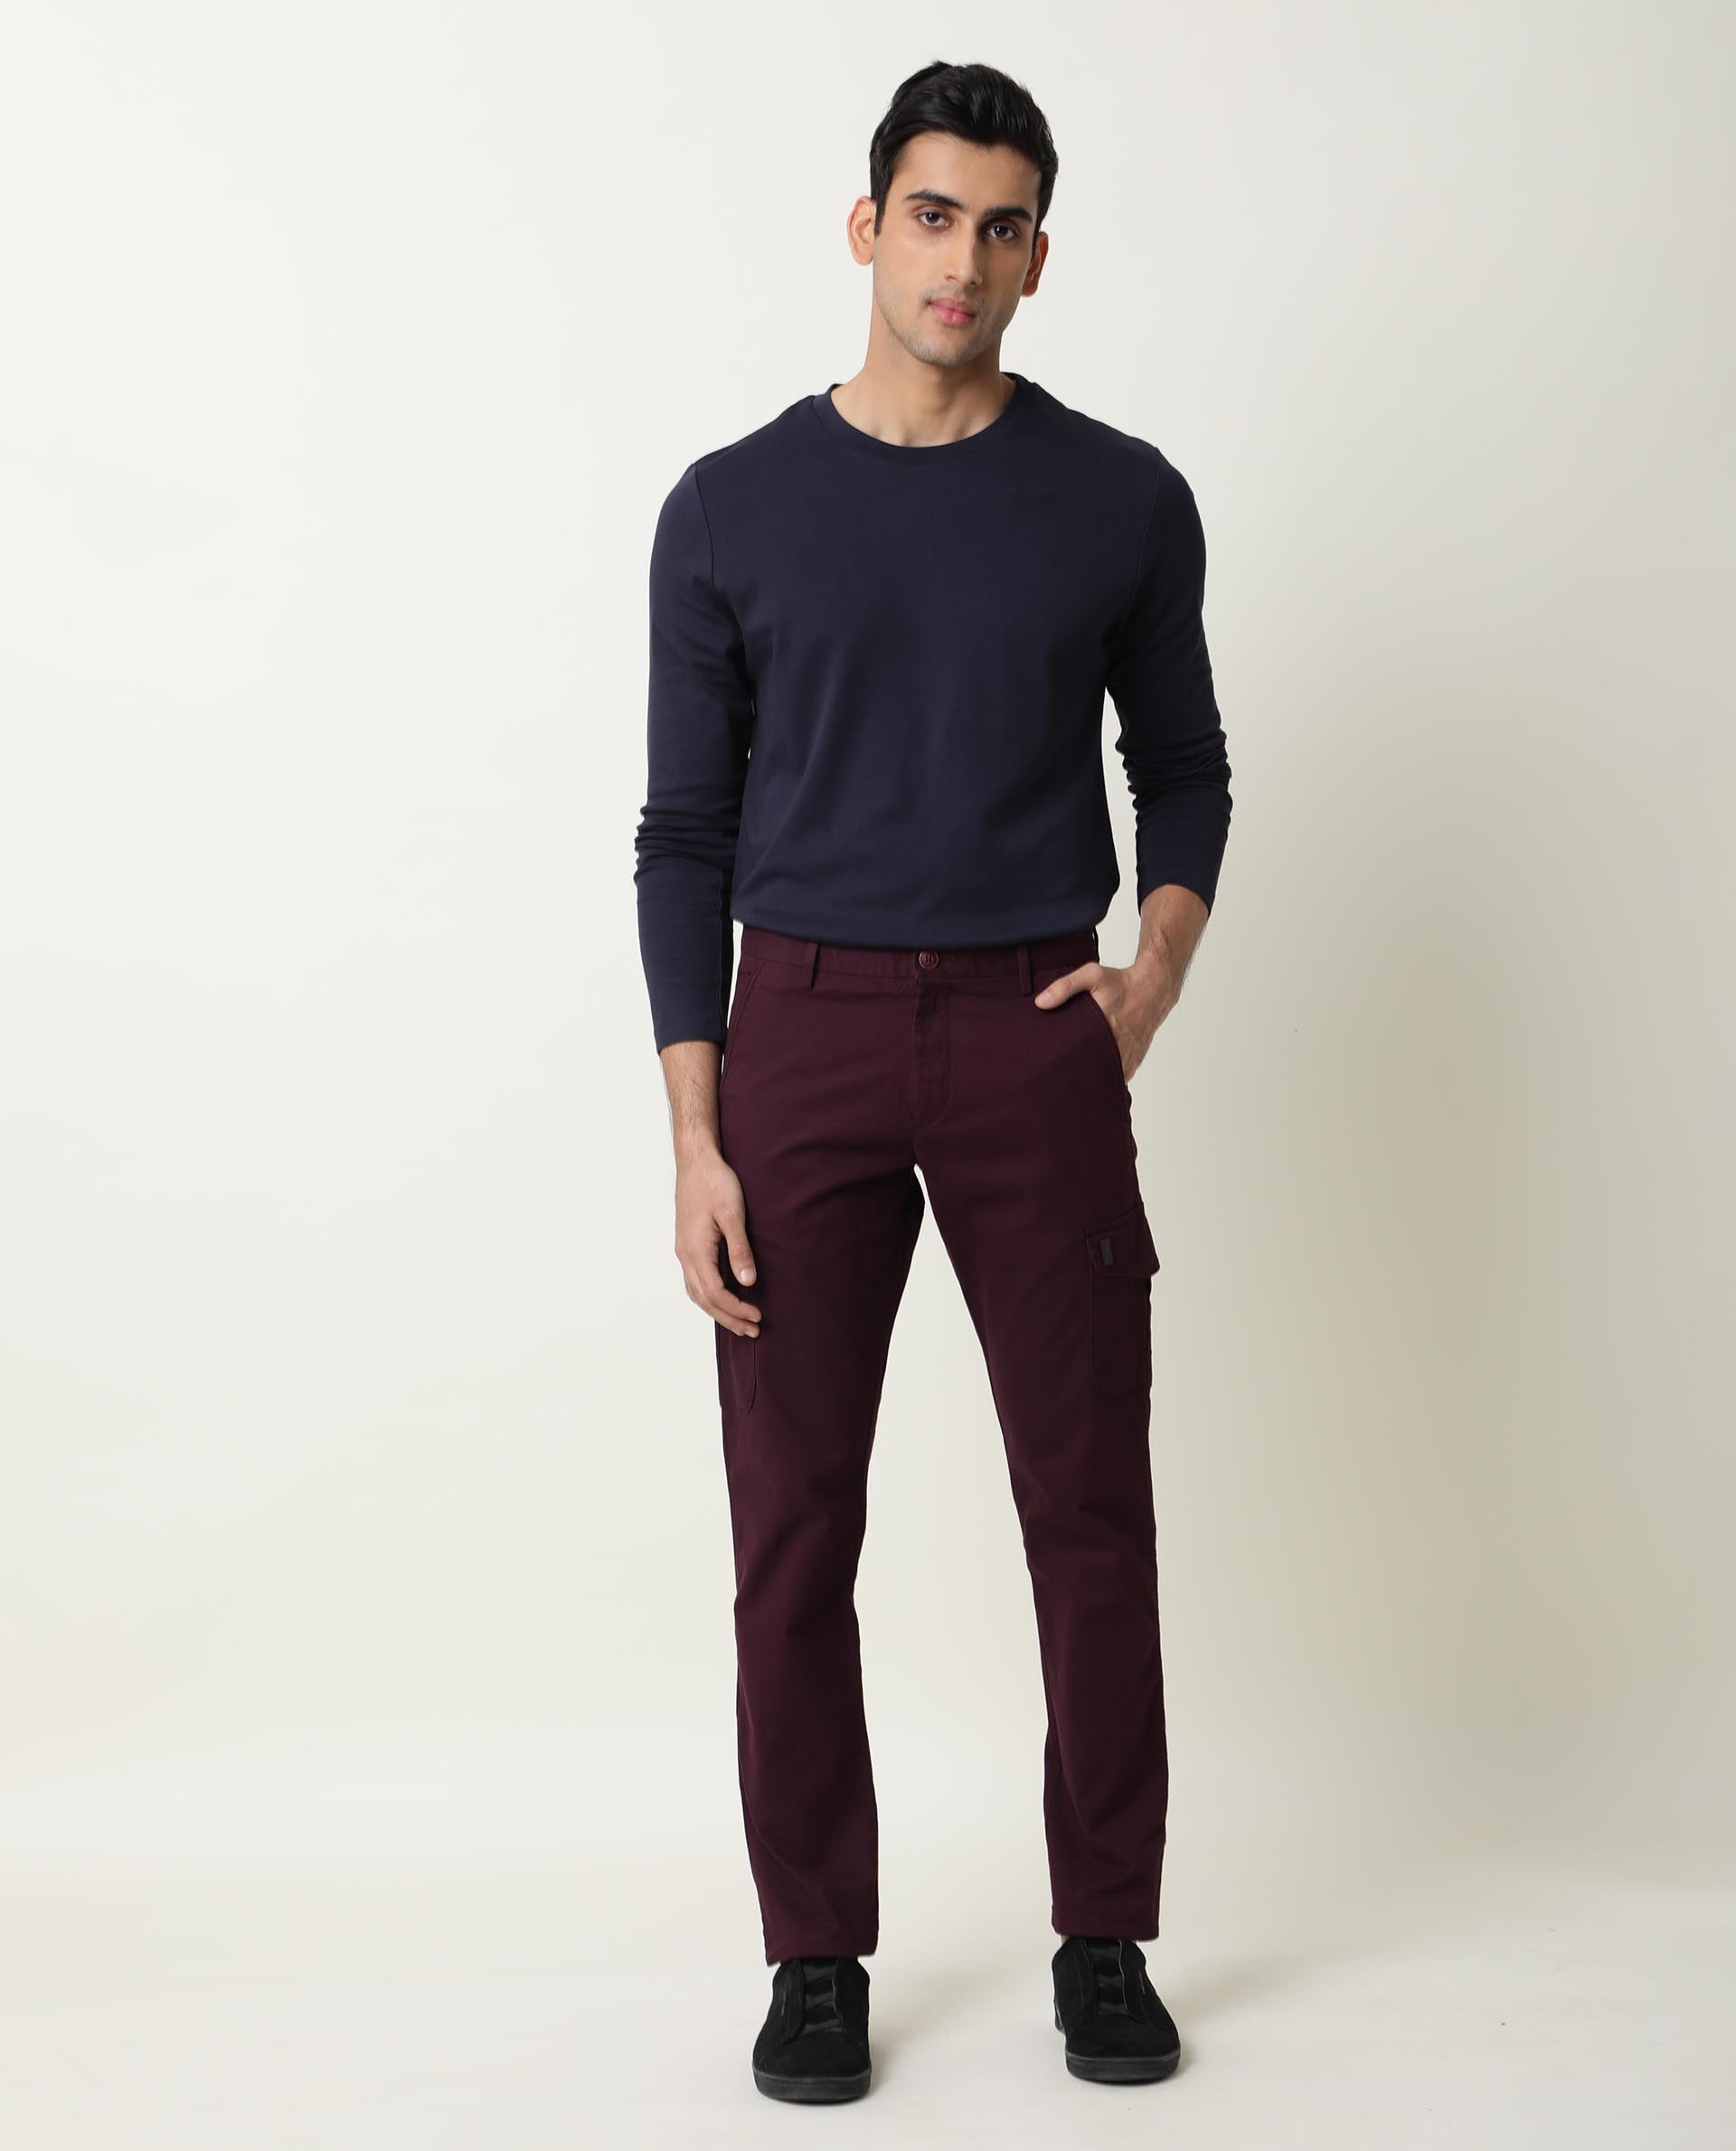 Top Trending  Shades Of Casual Pants Color Combination Outfits Ideas For  Mens 2023  Red pants men Burgundy pants Burgundy pants outfit